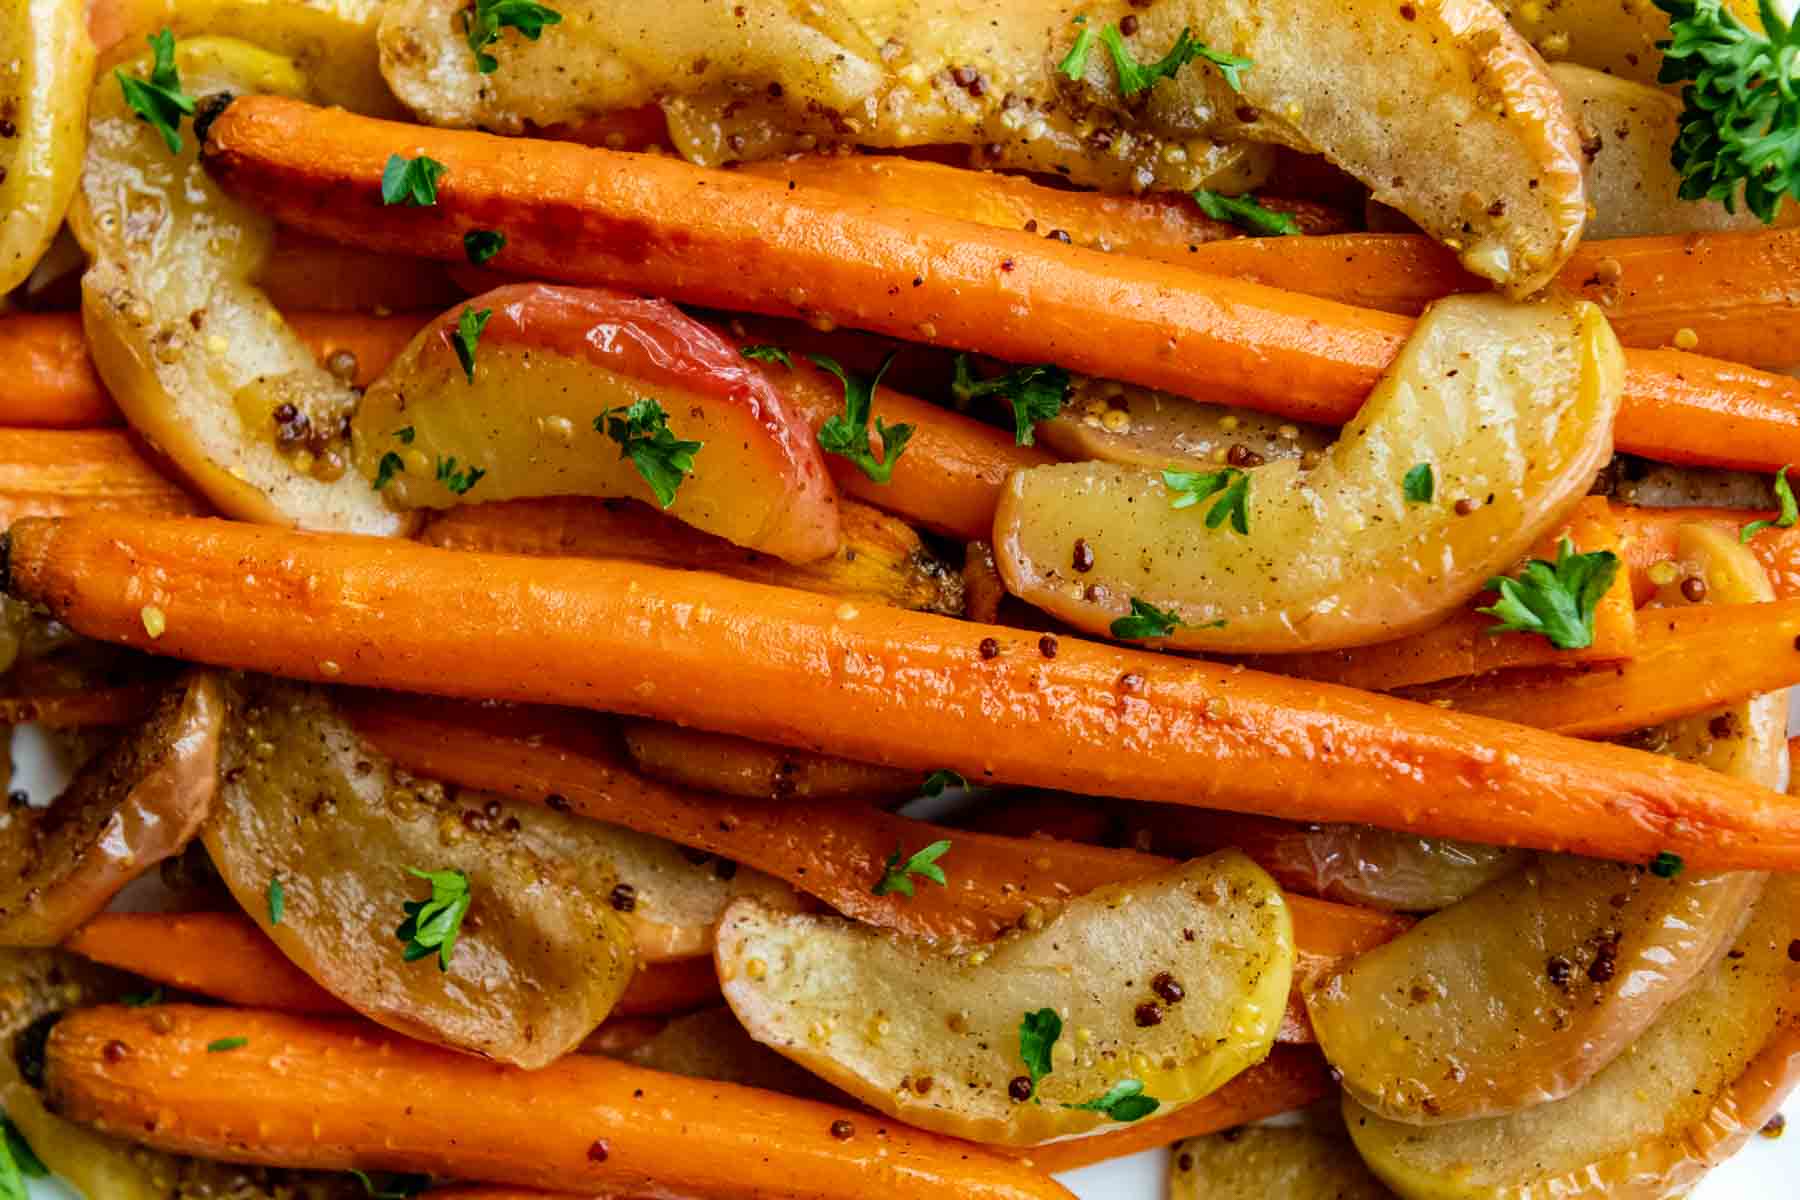 carrots and apples close up with parsley sprinkled on top.